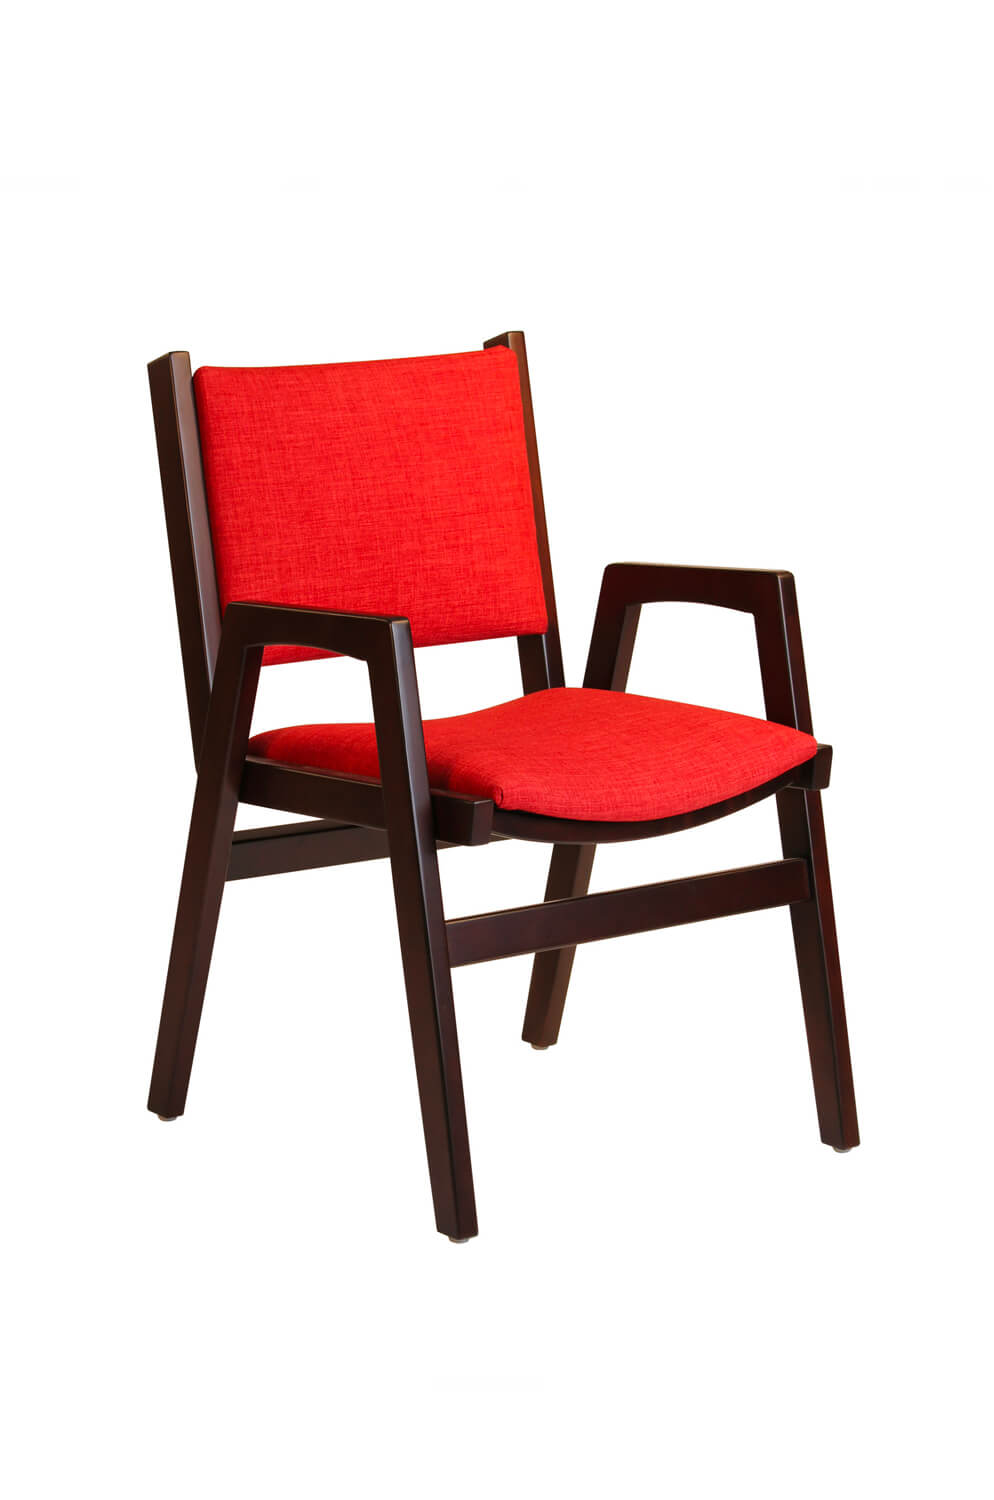 Darafeev S Spencer Upholstered, Red Upholstered Dining Room Chairs With Arms